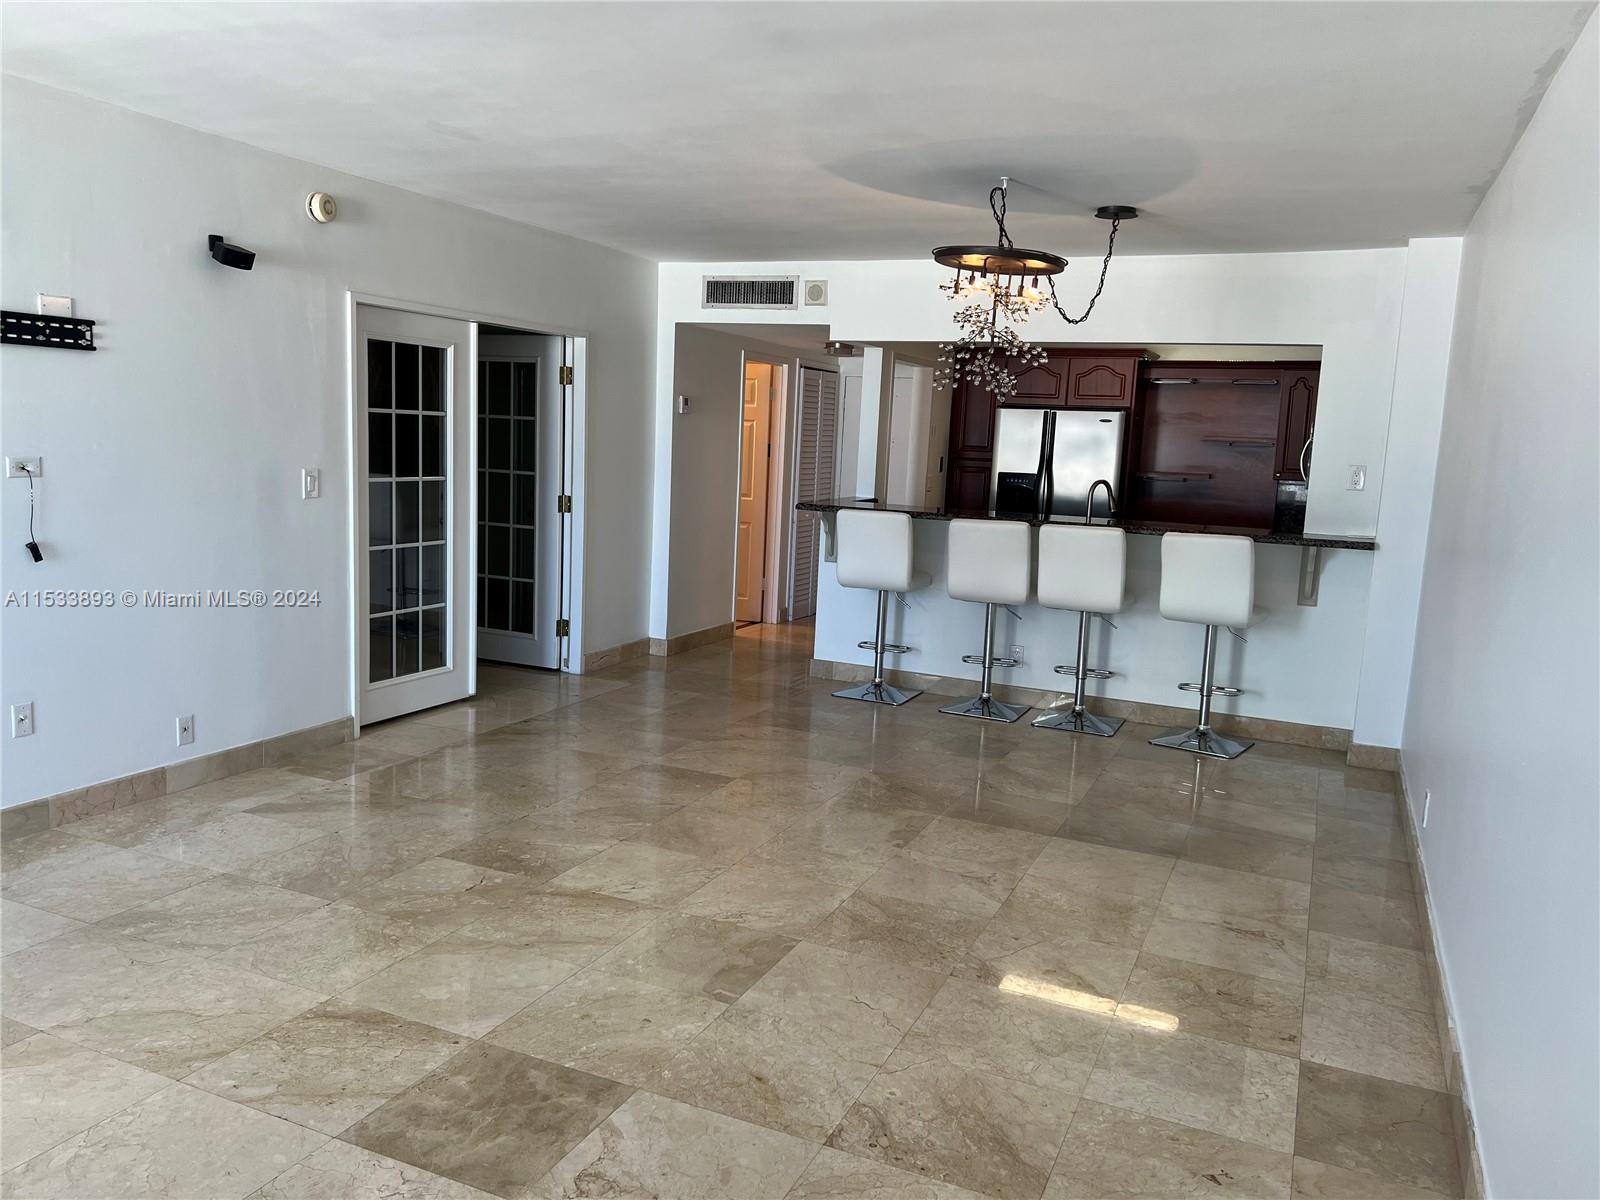 Photo of 3725 S Ocean Dr #1623 in Hollywood, FL